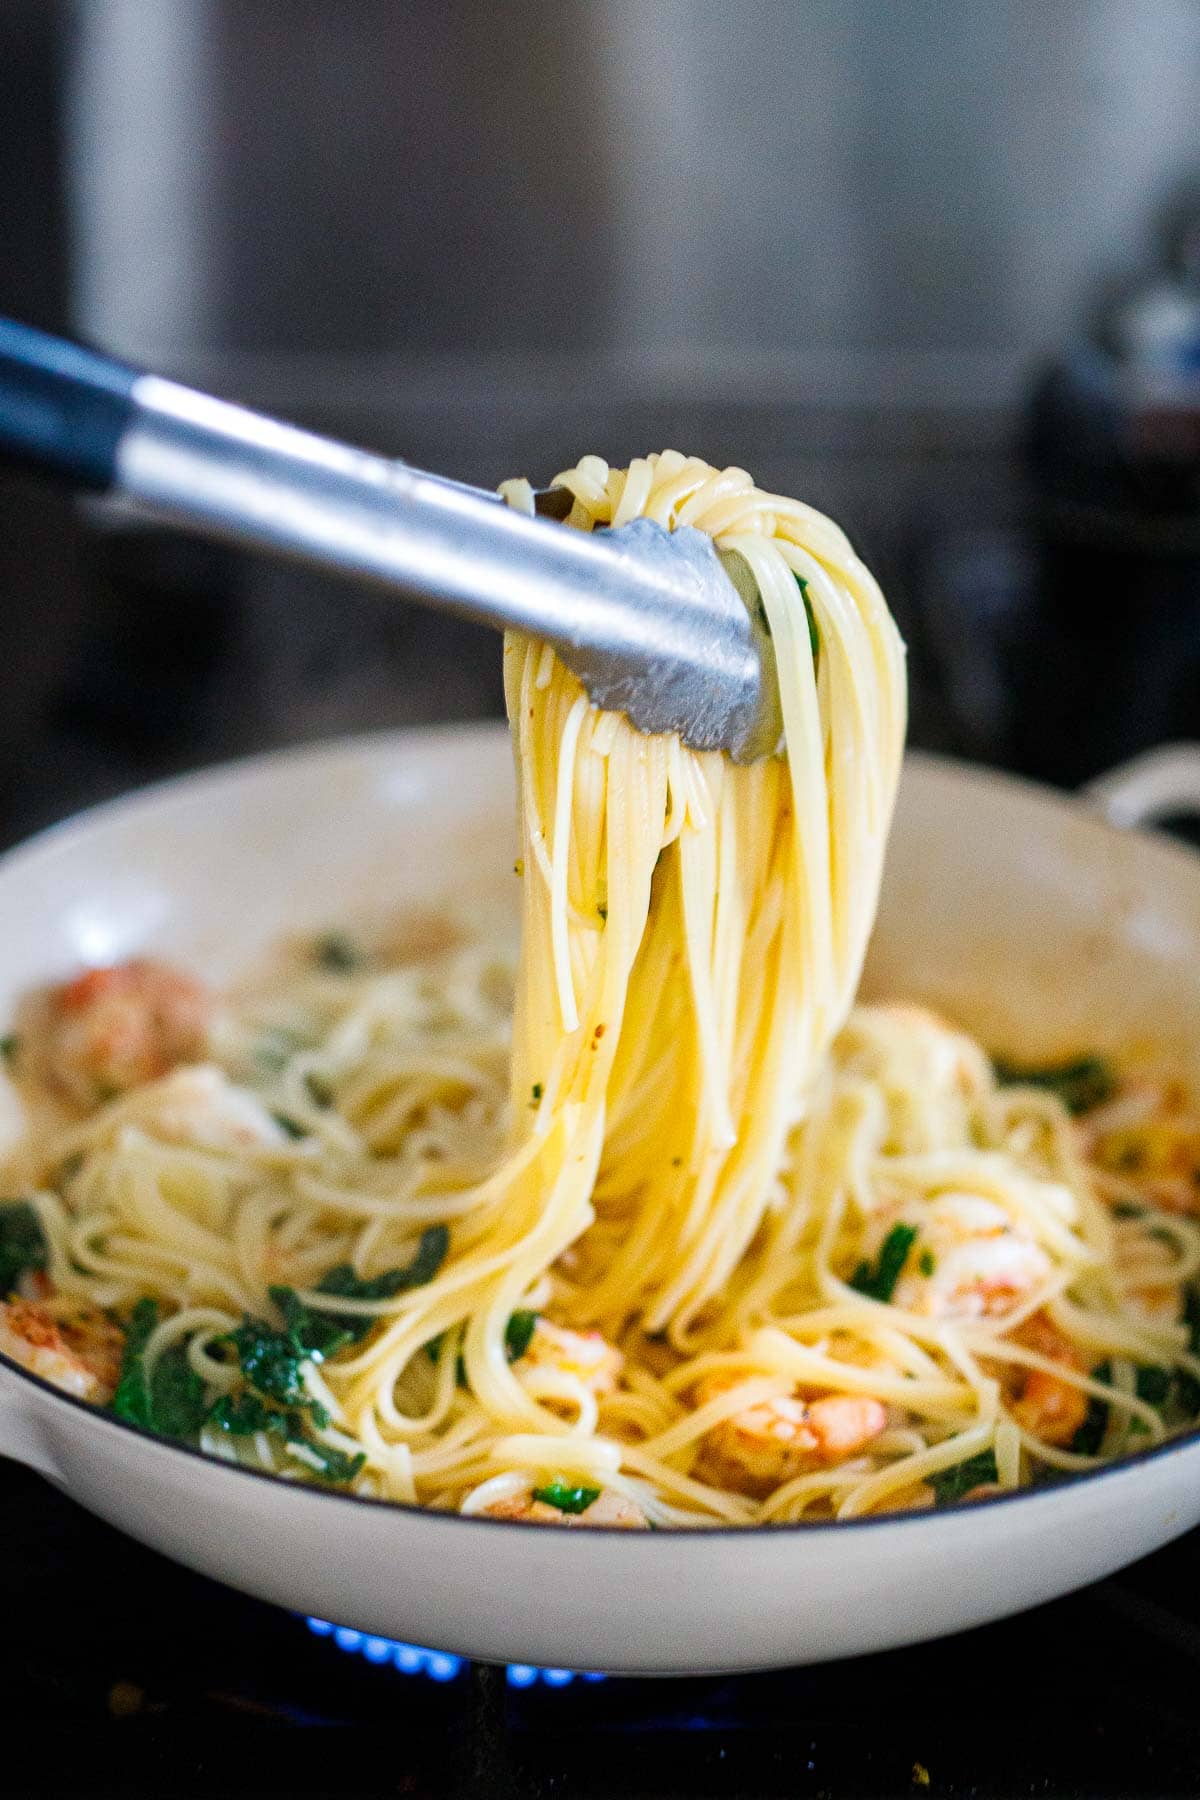 linguini pasta lifted by tongs in pan with shrimp and kale